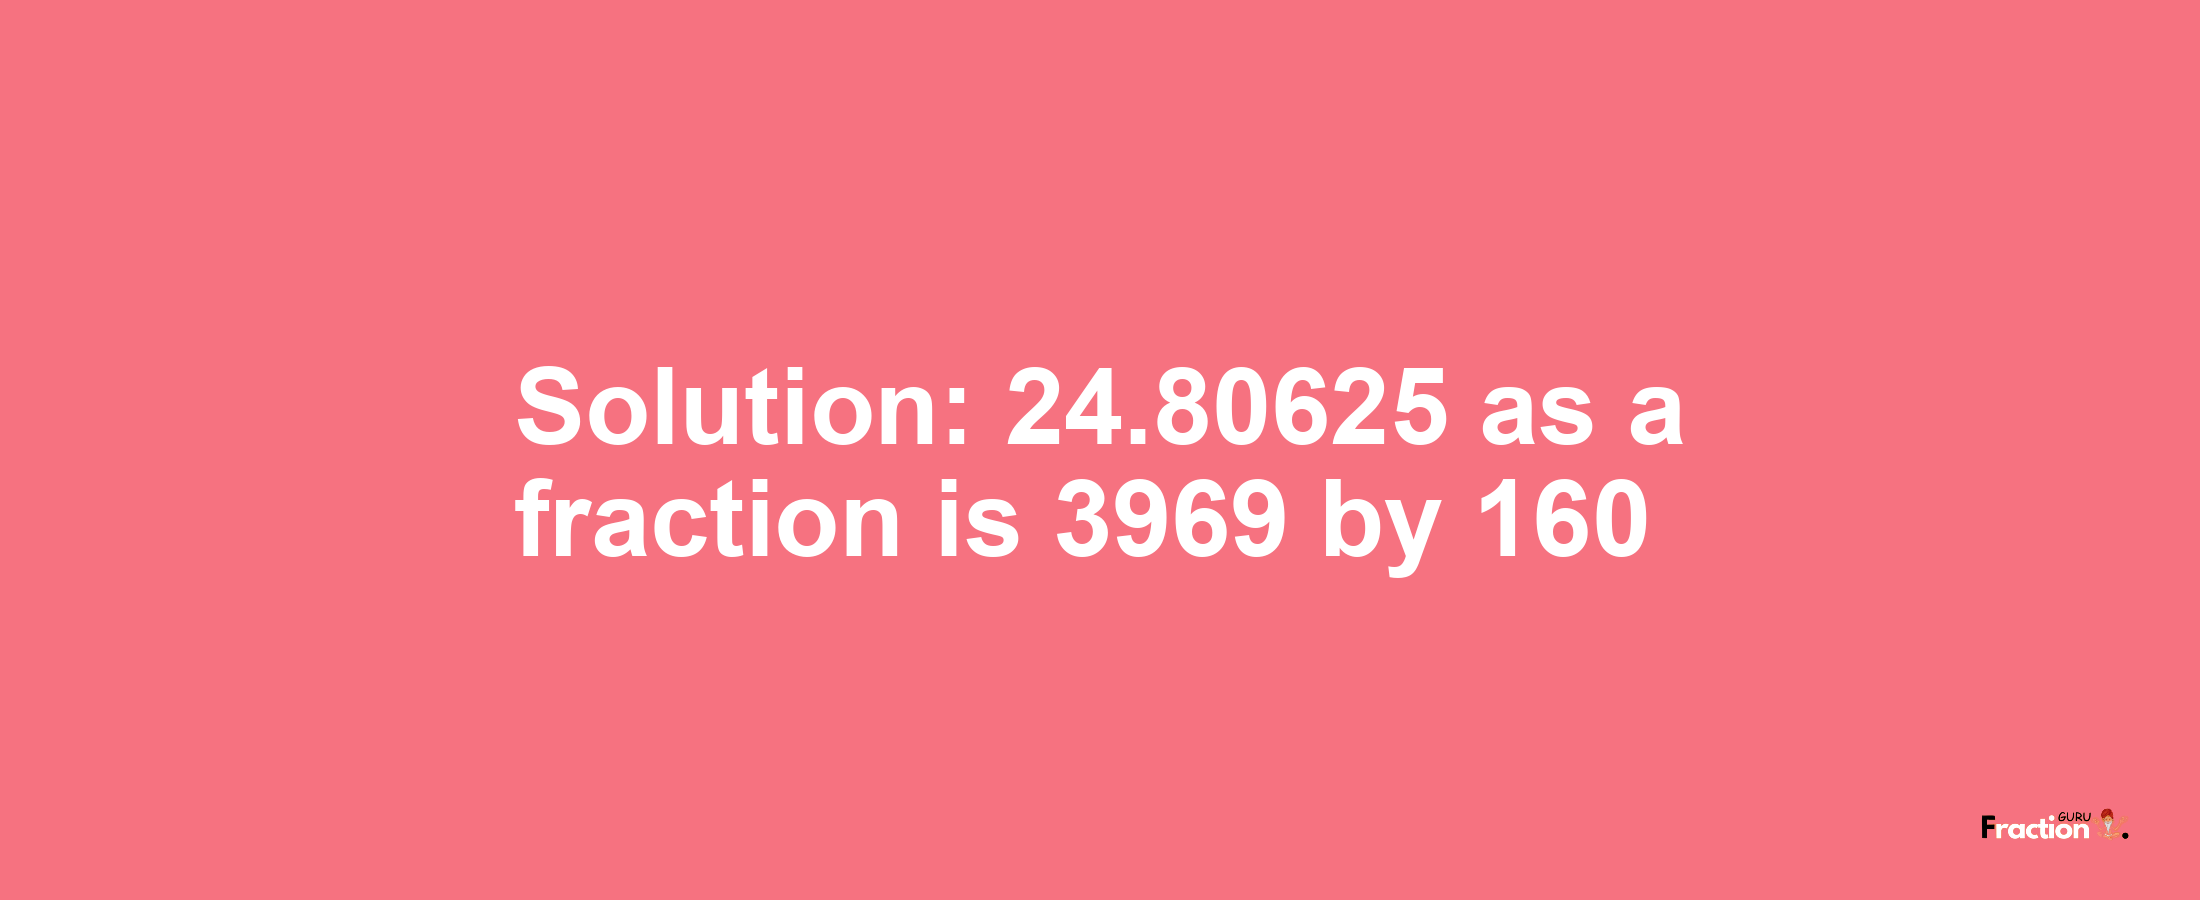 Solution:24.80625 as a fraction is 3969/160